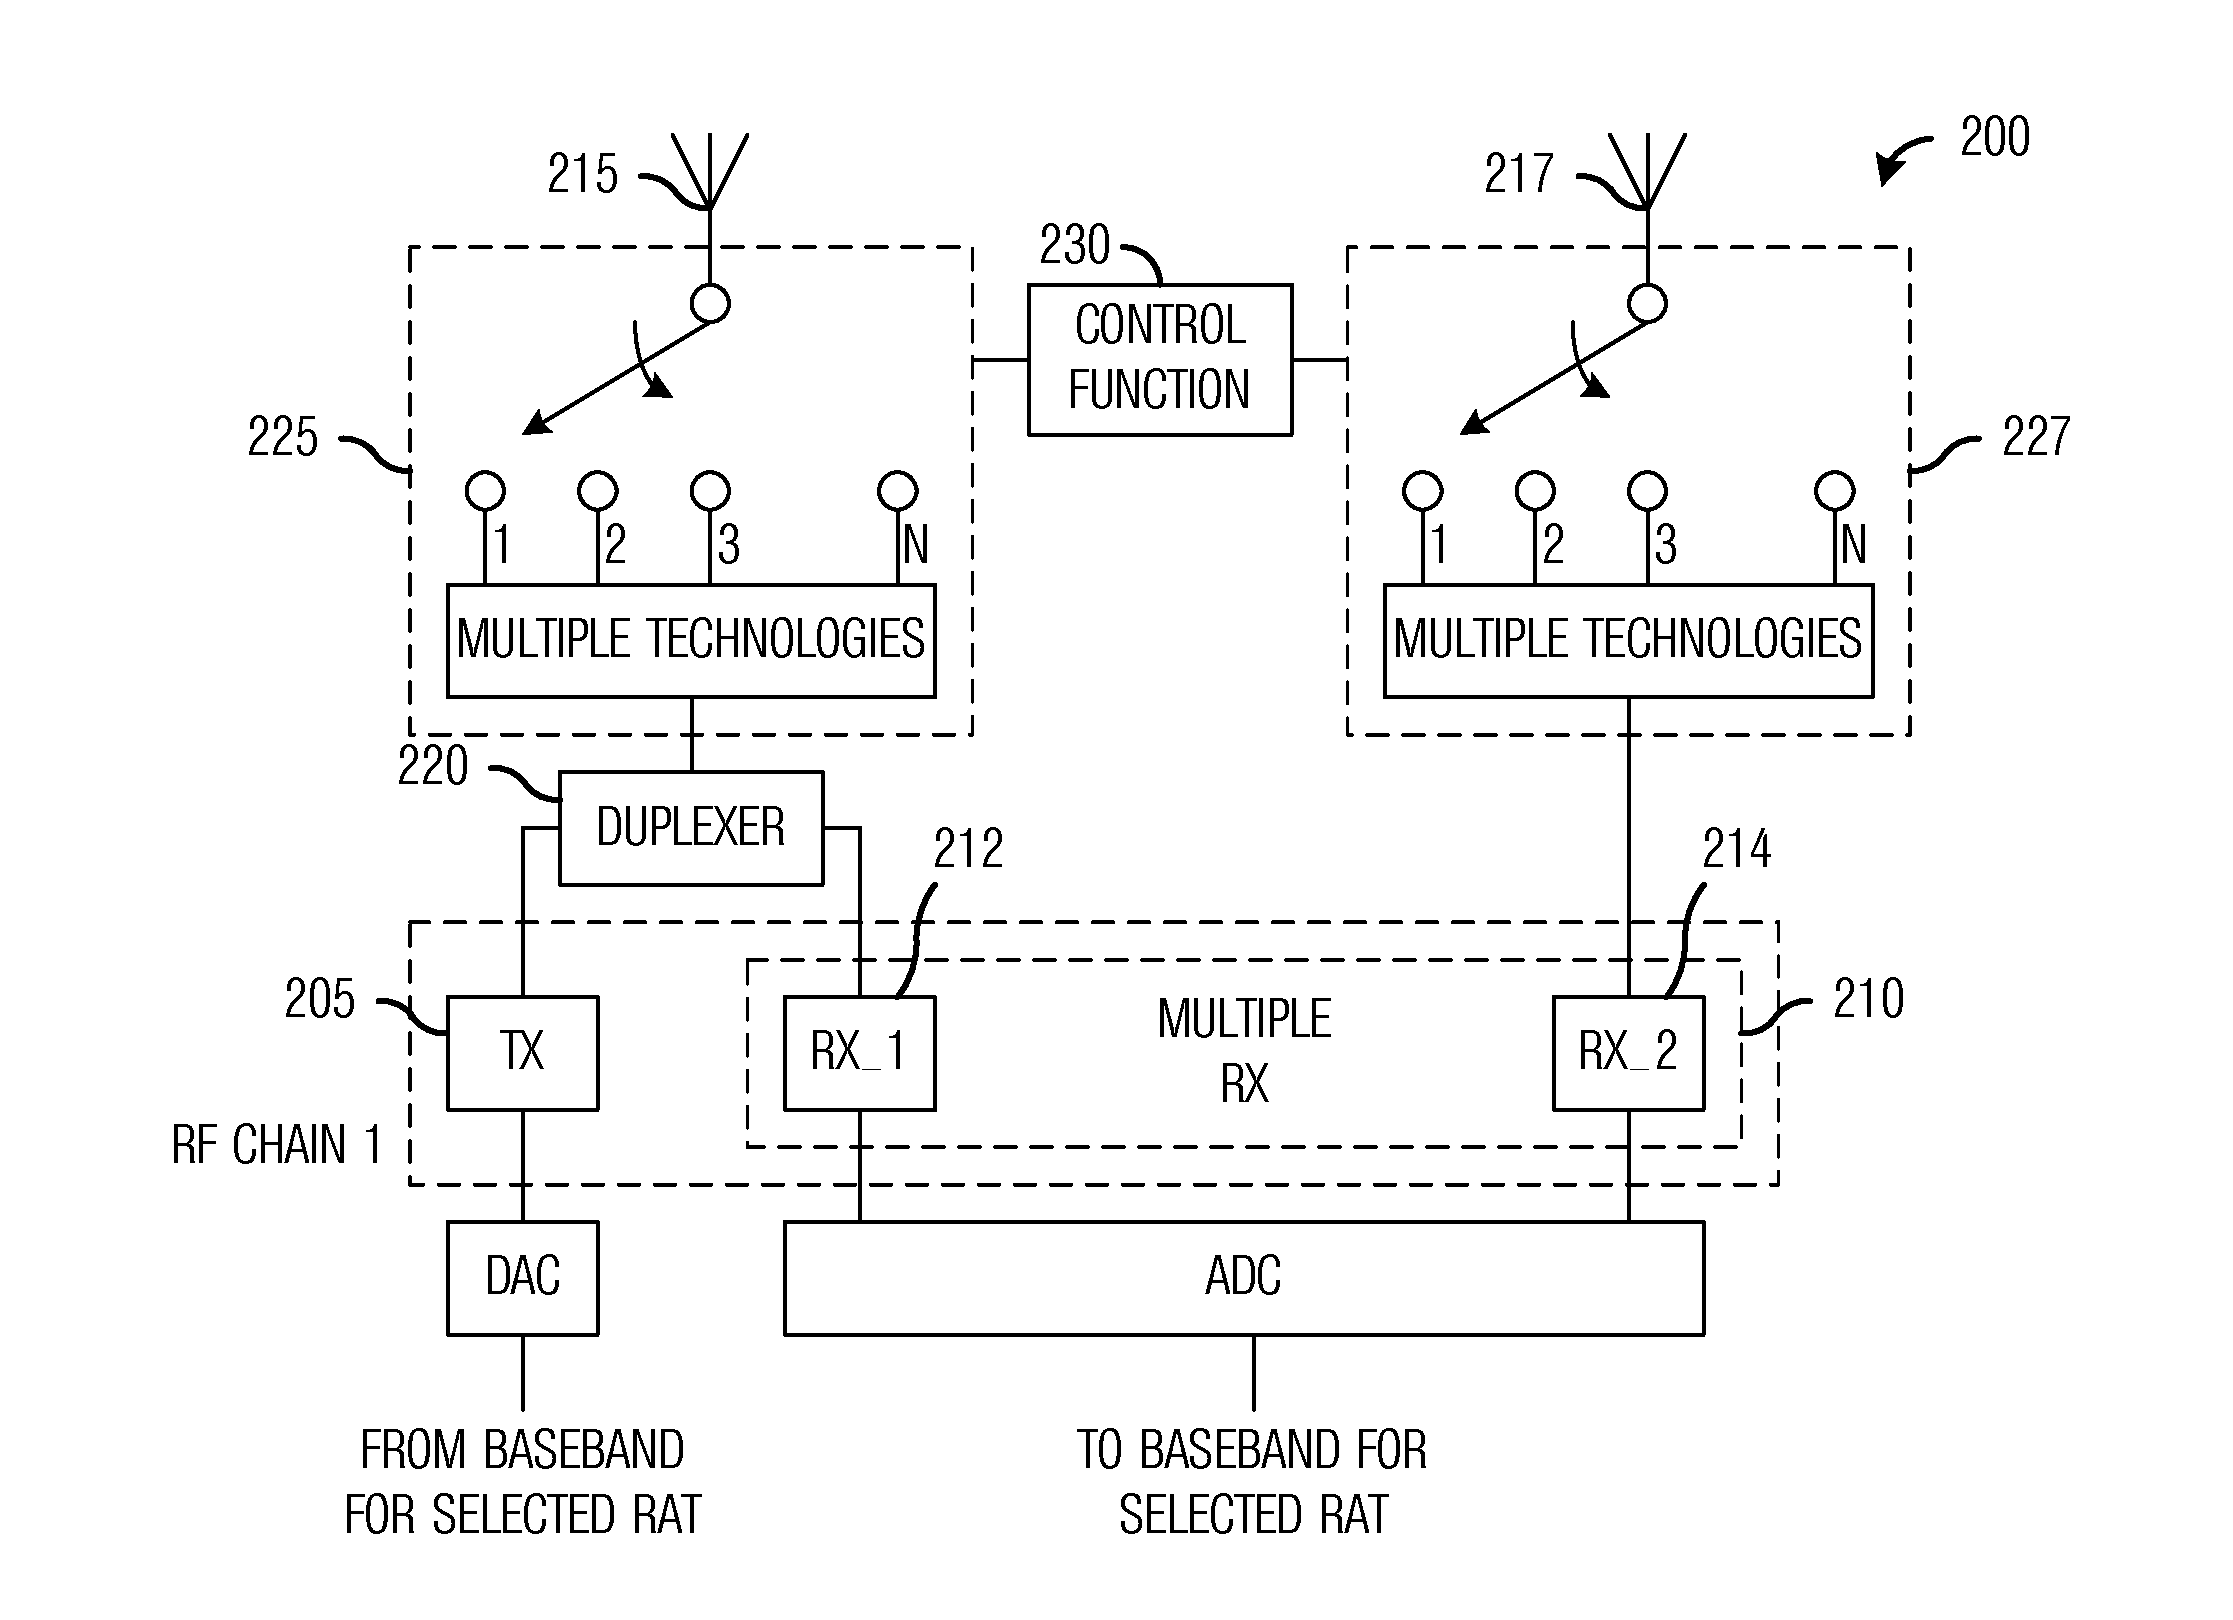 System and Method for Supporting Handovers Between Different Radio Access Technologies of a Wireless Communications System